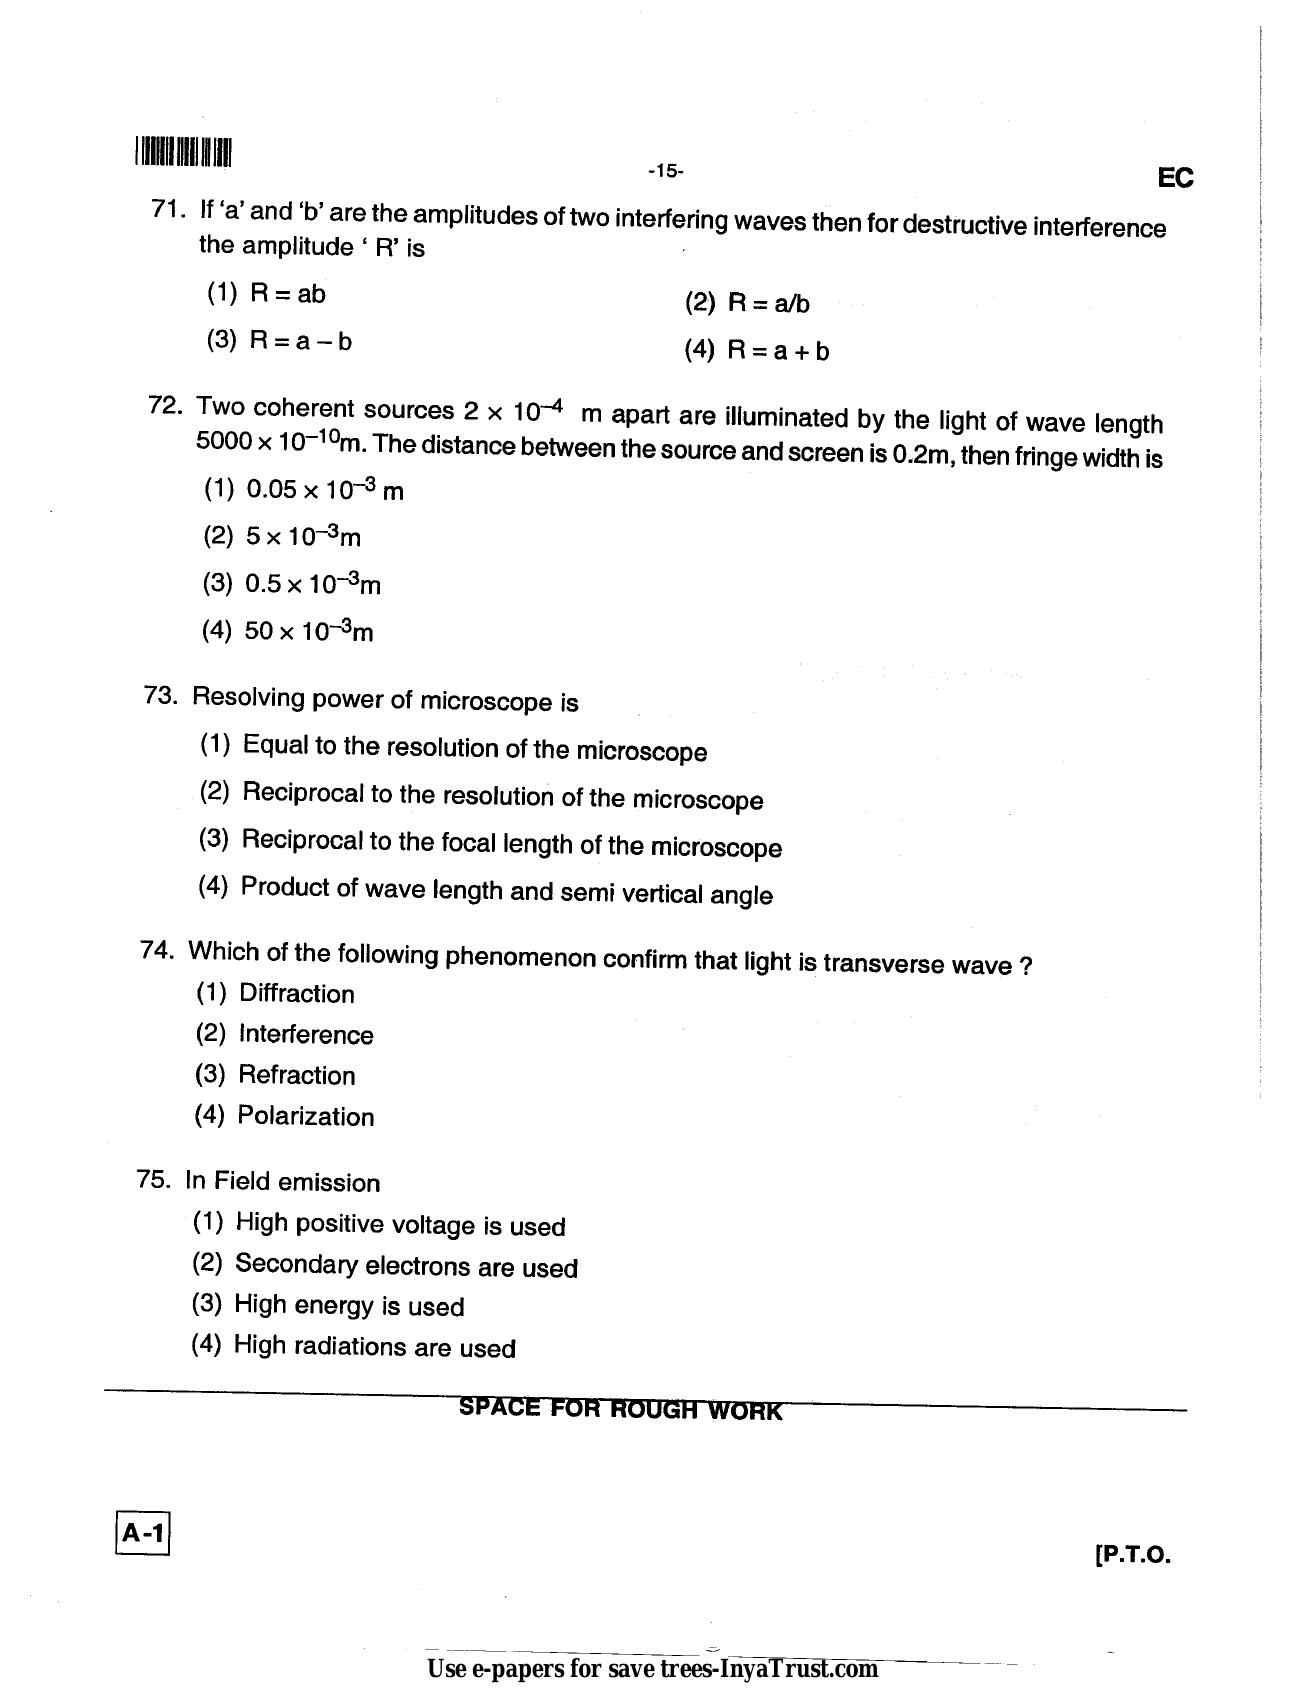 Karnataka Diploma CET- 2013 Electronics and Communication Engineering Question Paper - Page 15